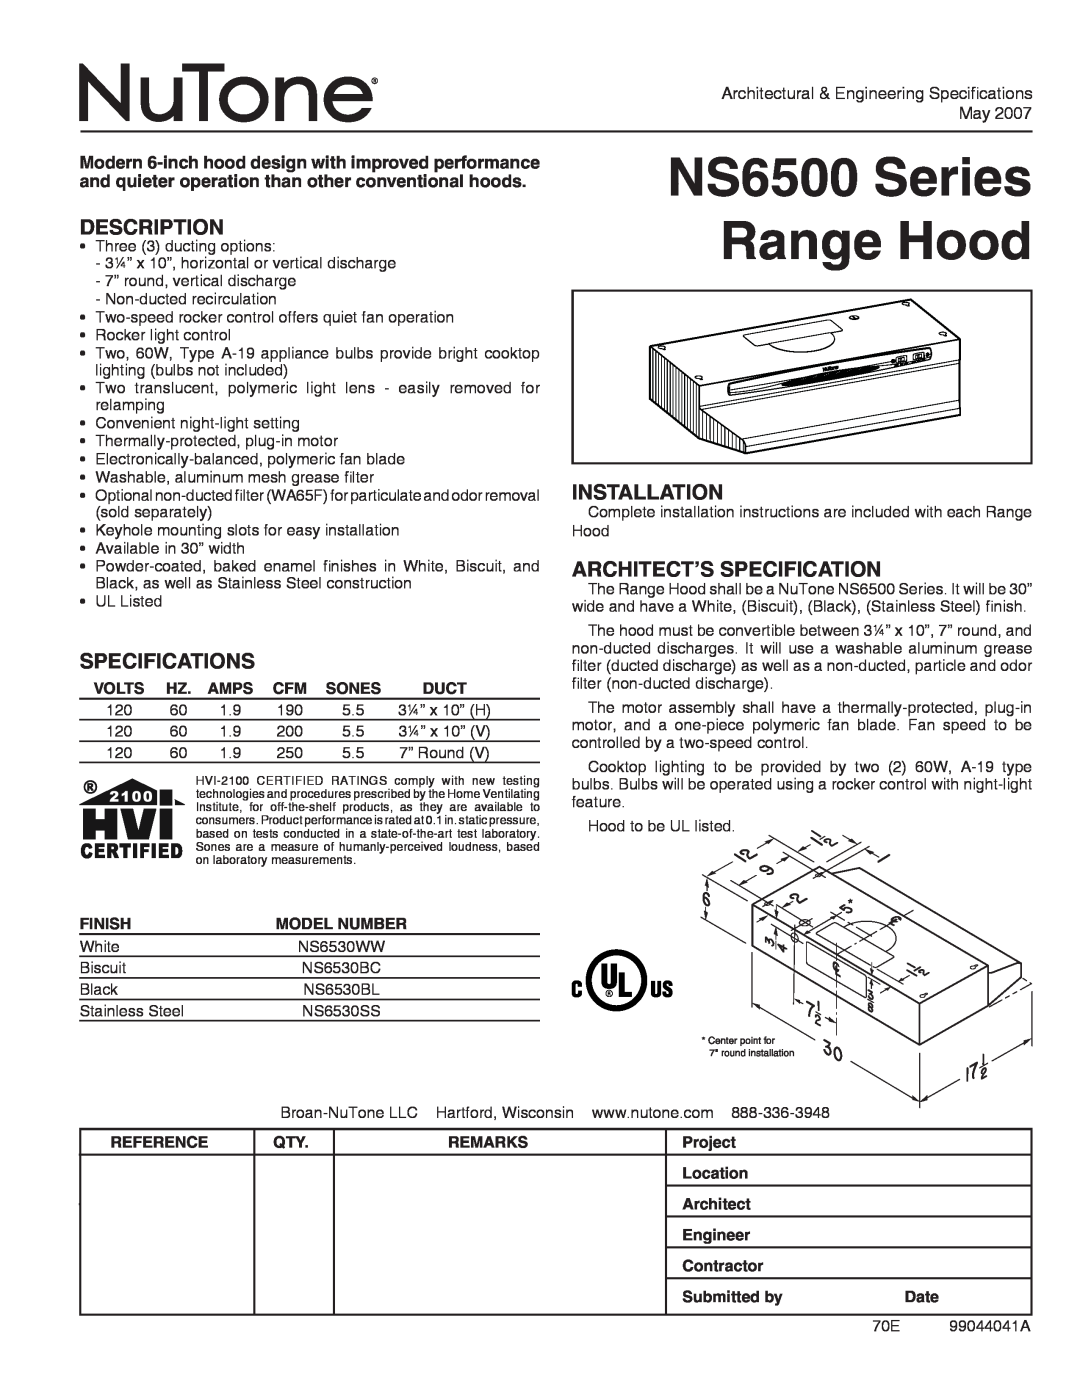 NuTone NS6530WW, NS6530SS, NS6530BL specifications NS6500 Series Range Hood, Description, Specifications, Installation 